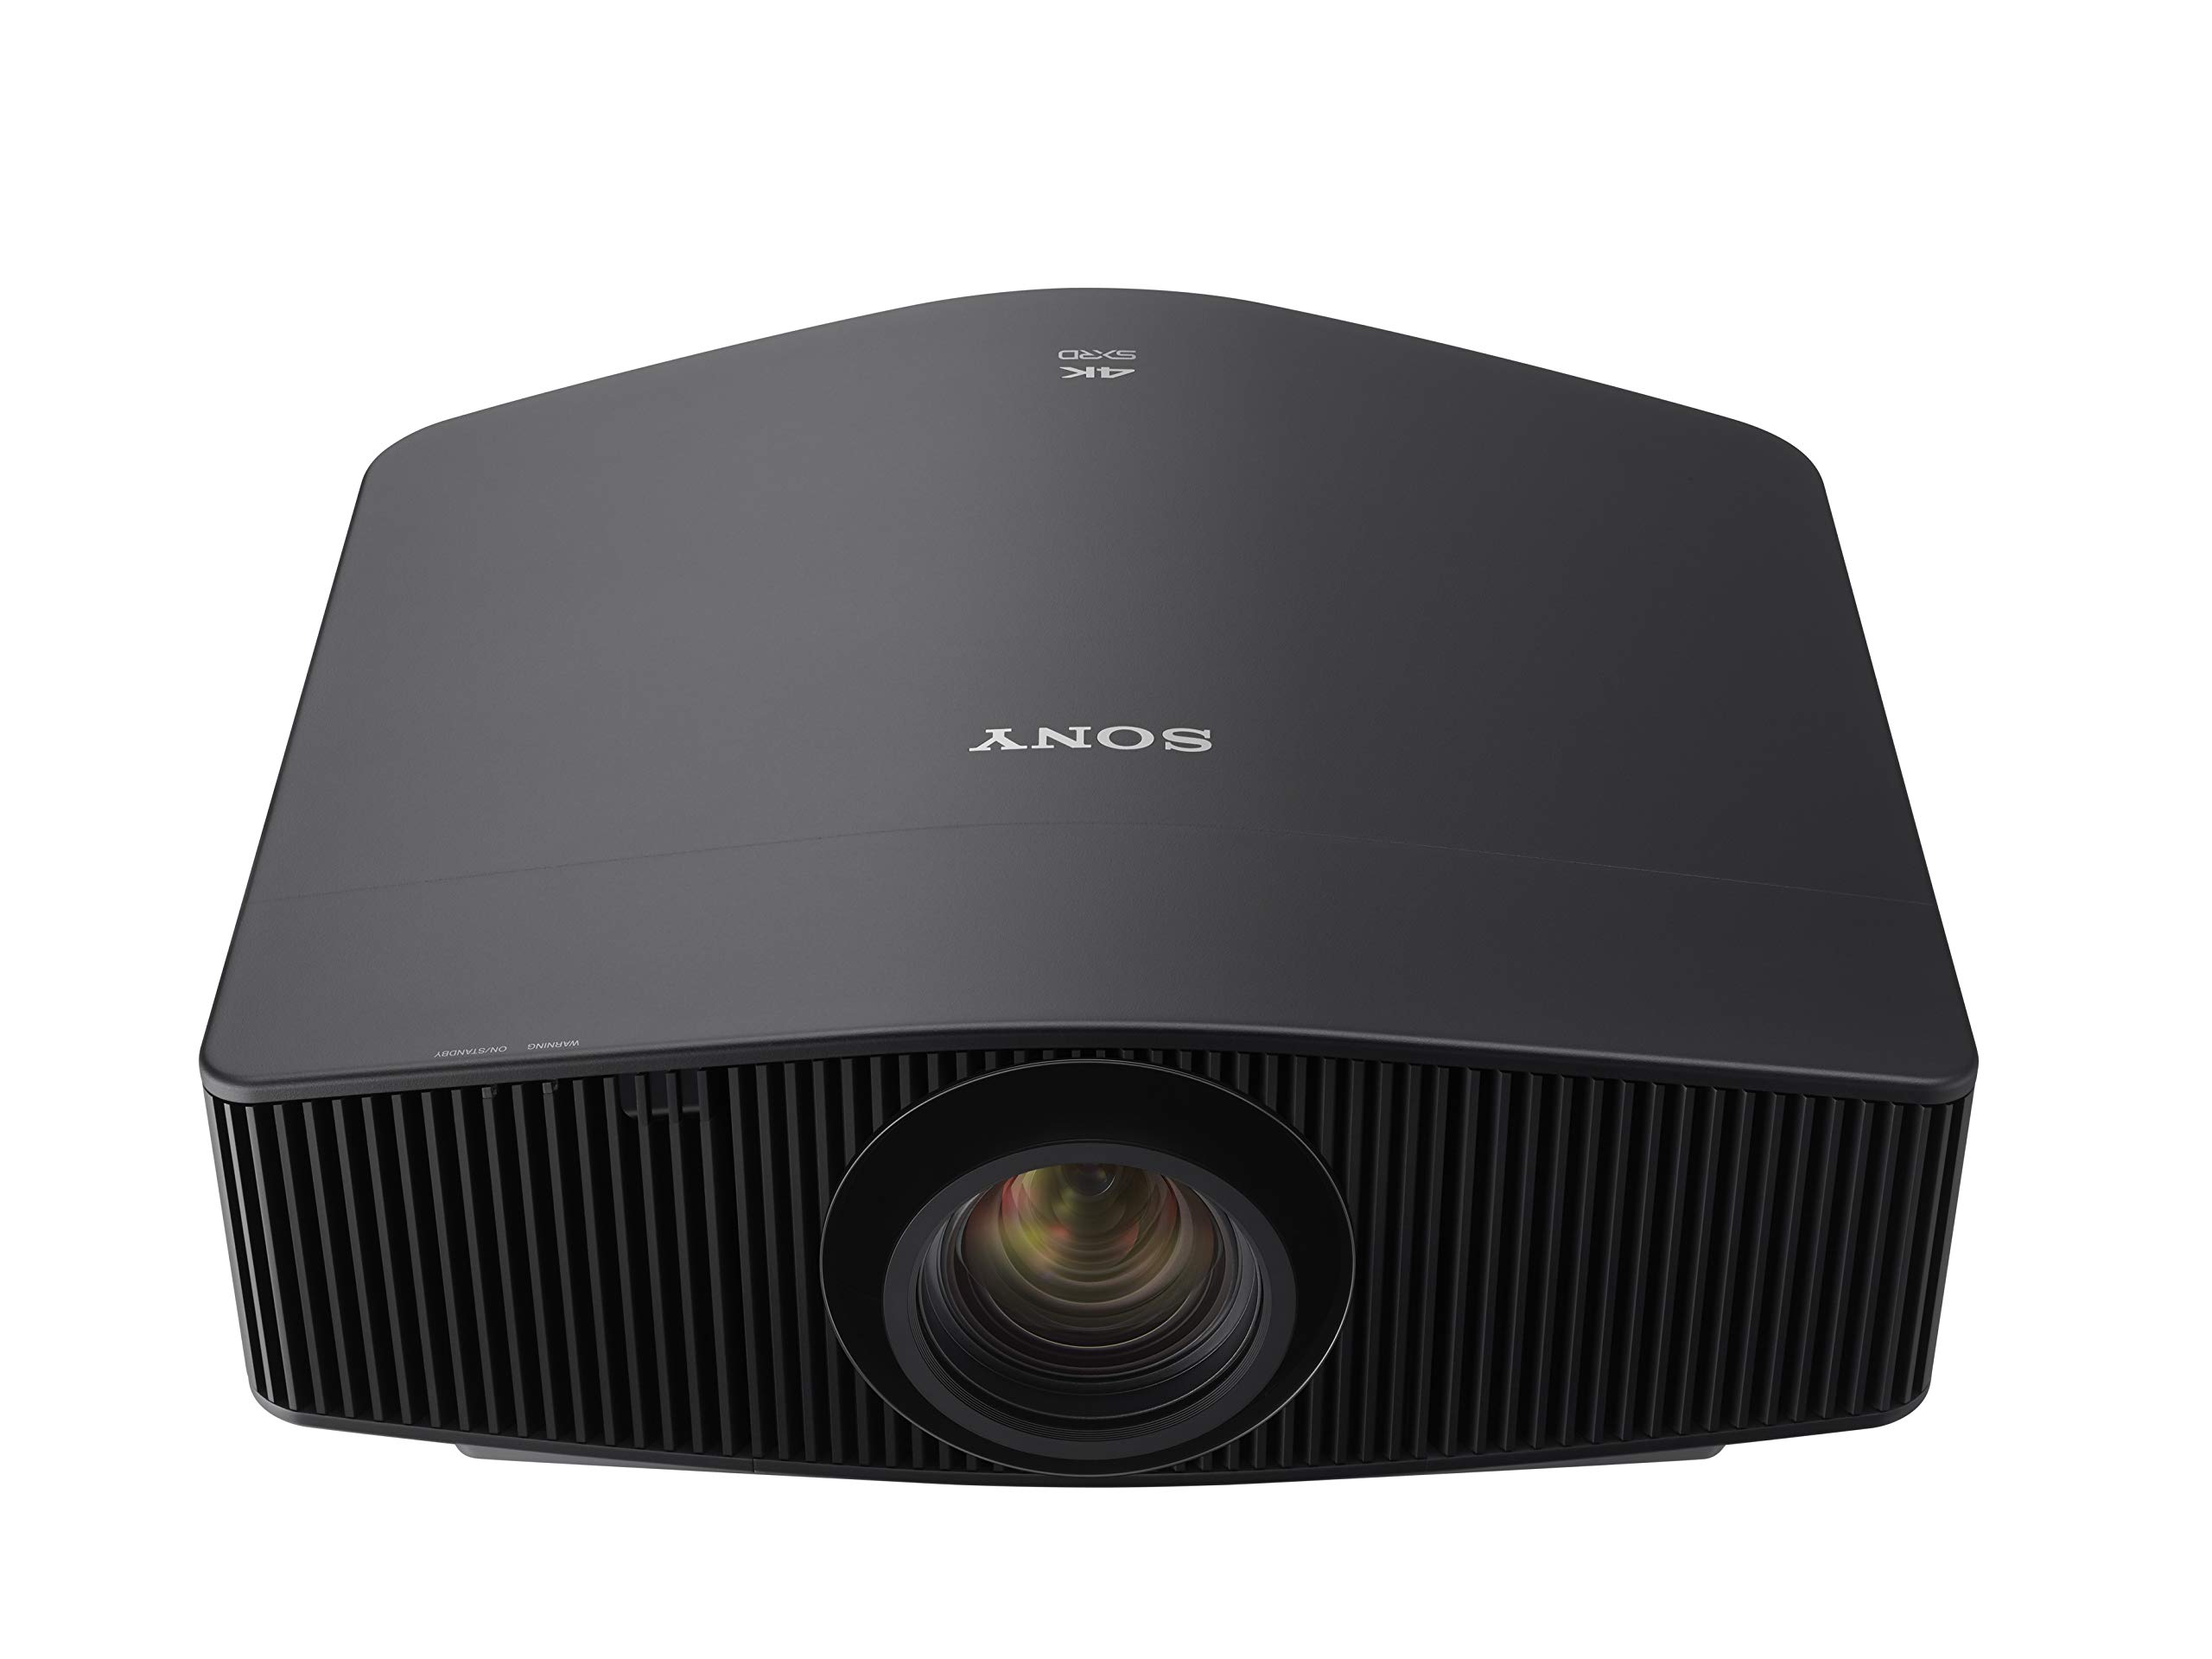 Sony 4K HDR Laser Home Theater Video Projector (VPLVW995ES)